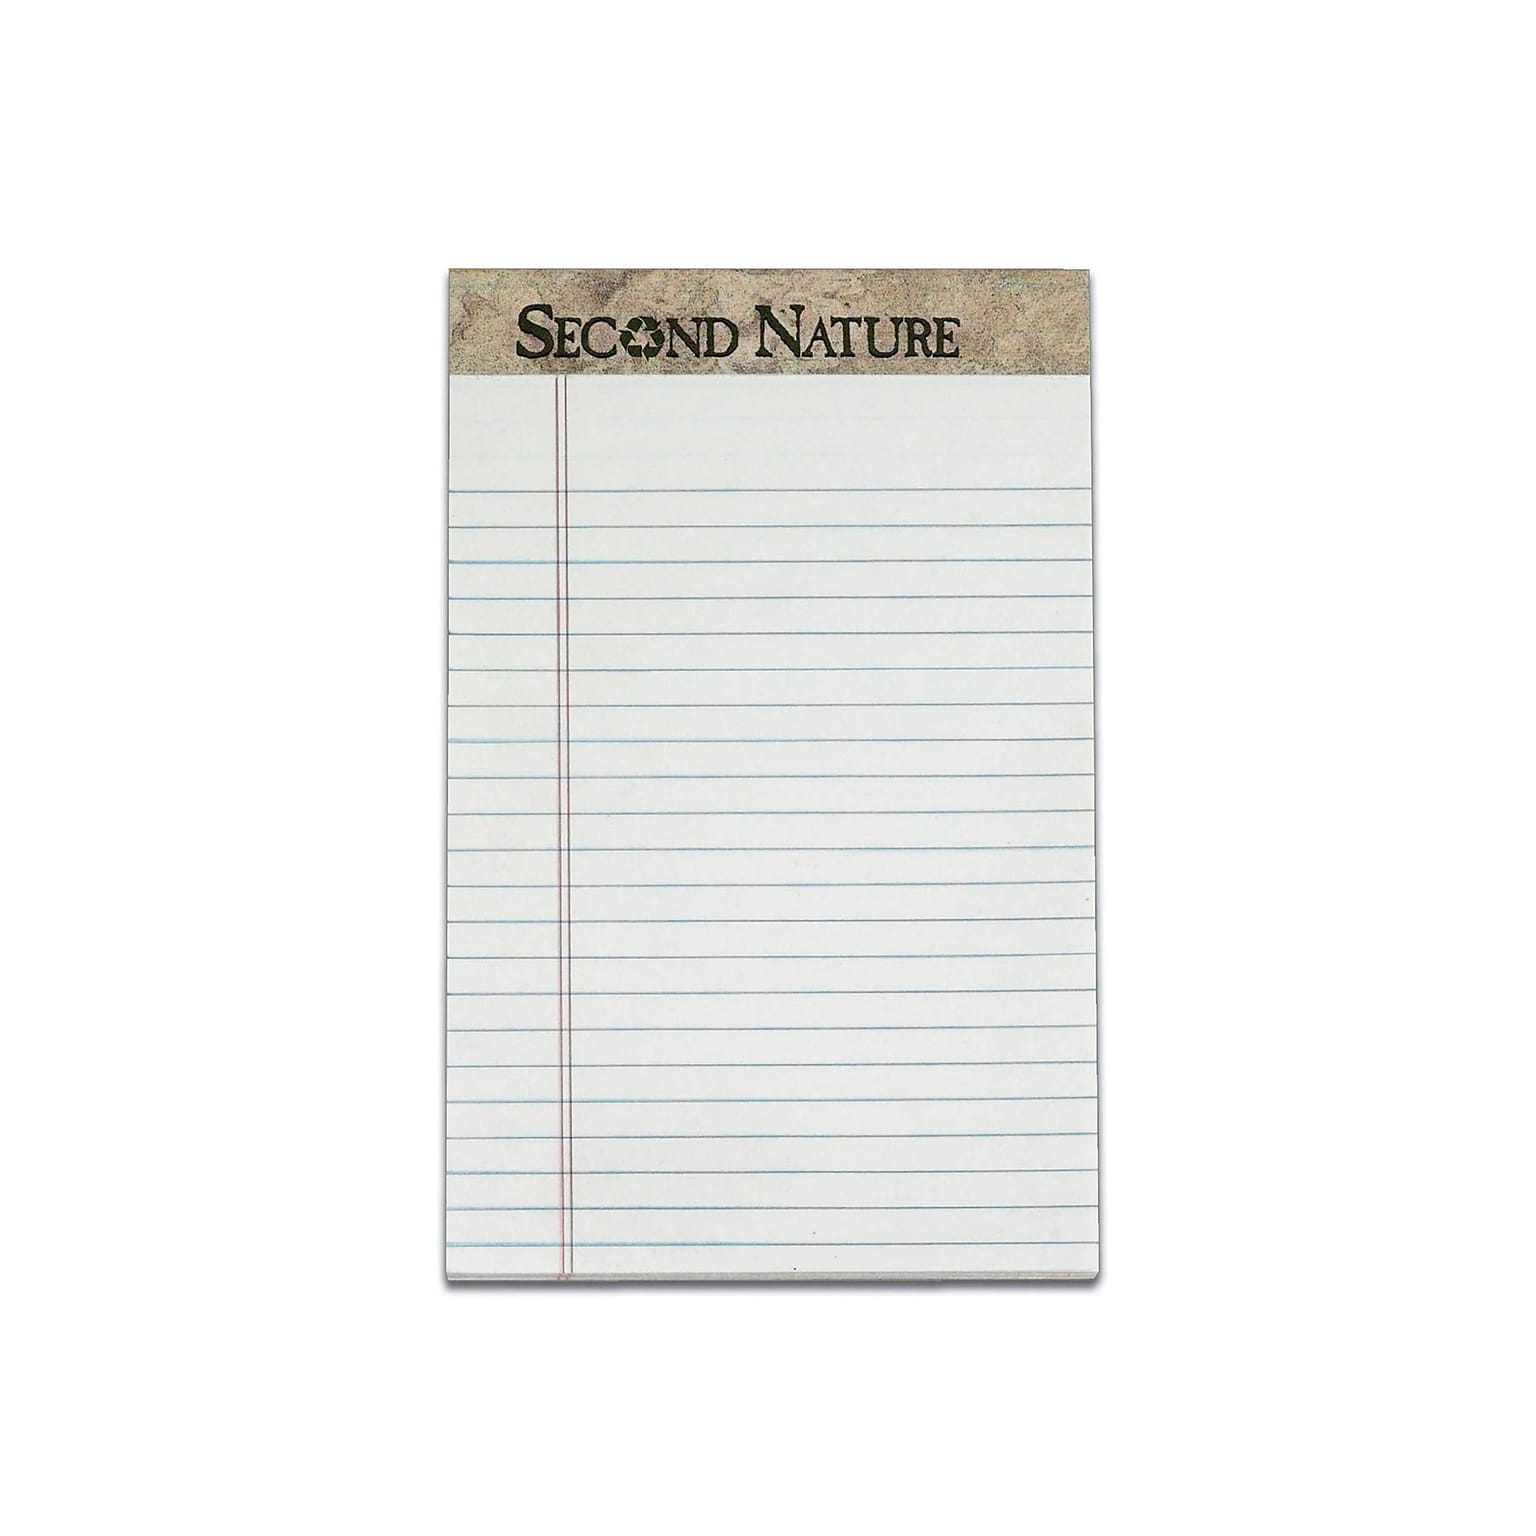 TOPS Second Nature Notepads, 5 x 8, Narrow, White, 50 Sheets/Pad, 12 Pads/Pack (74830)